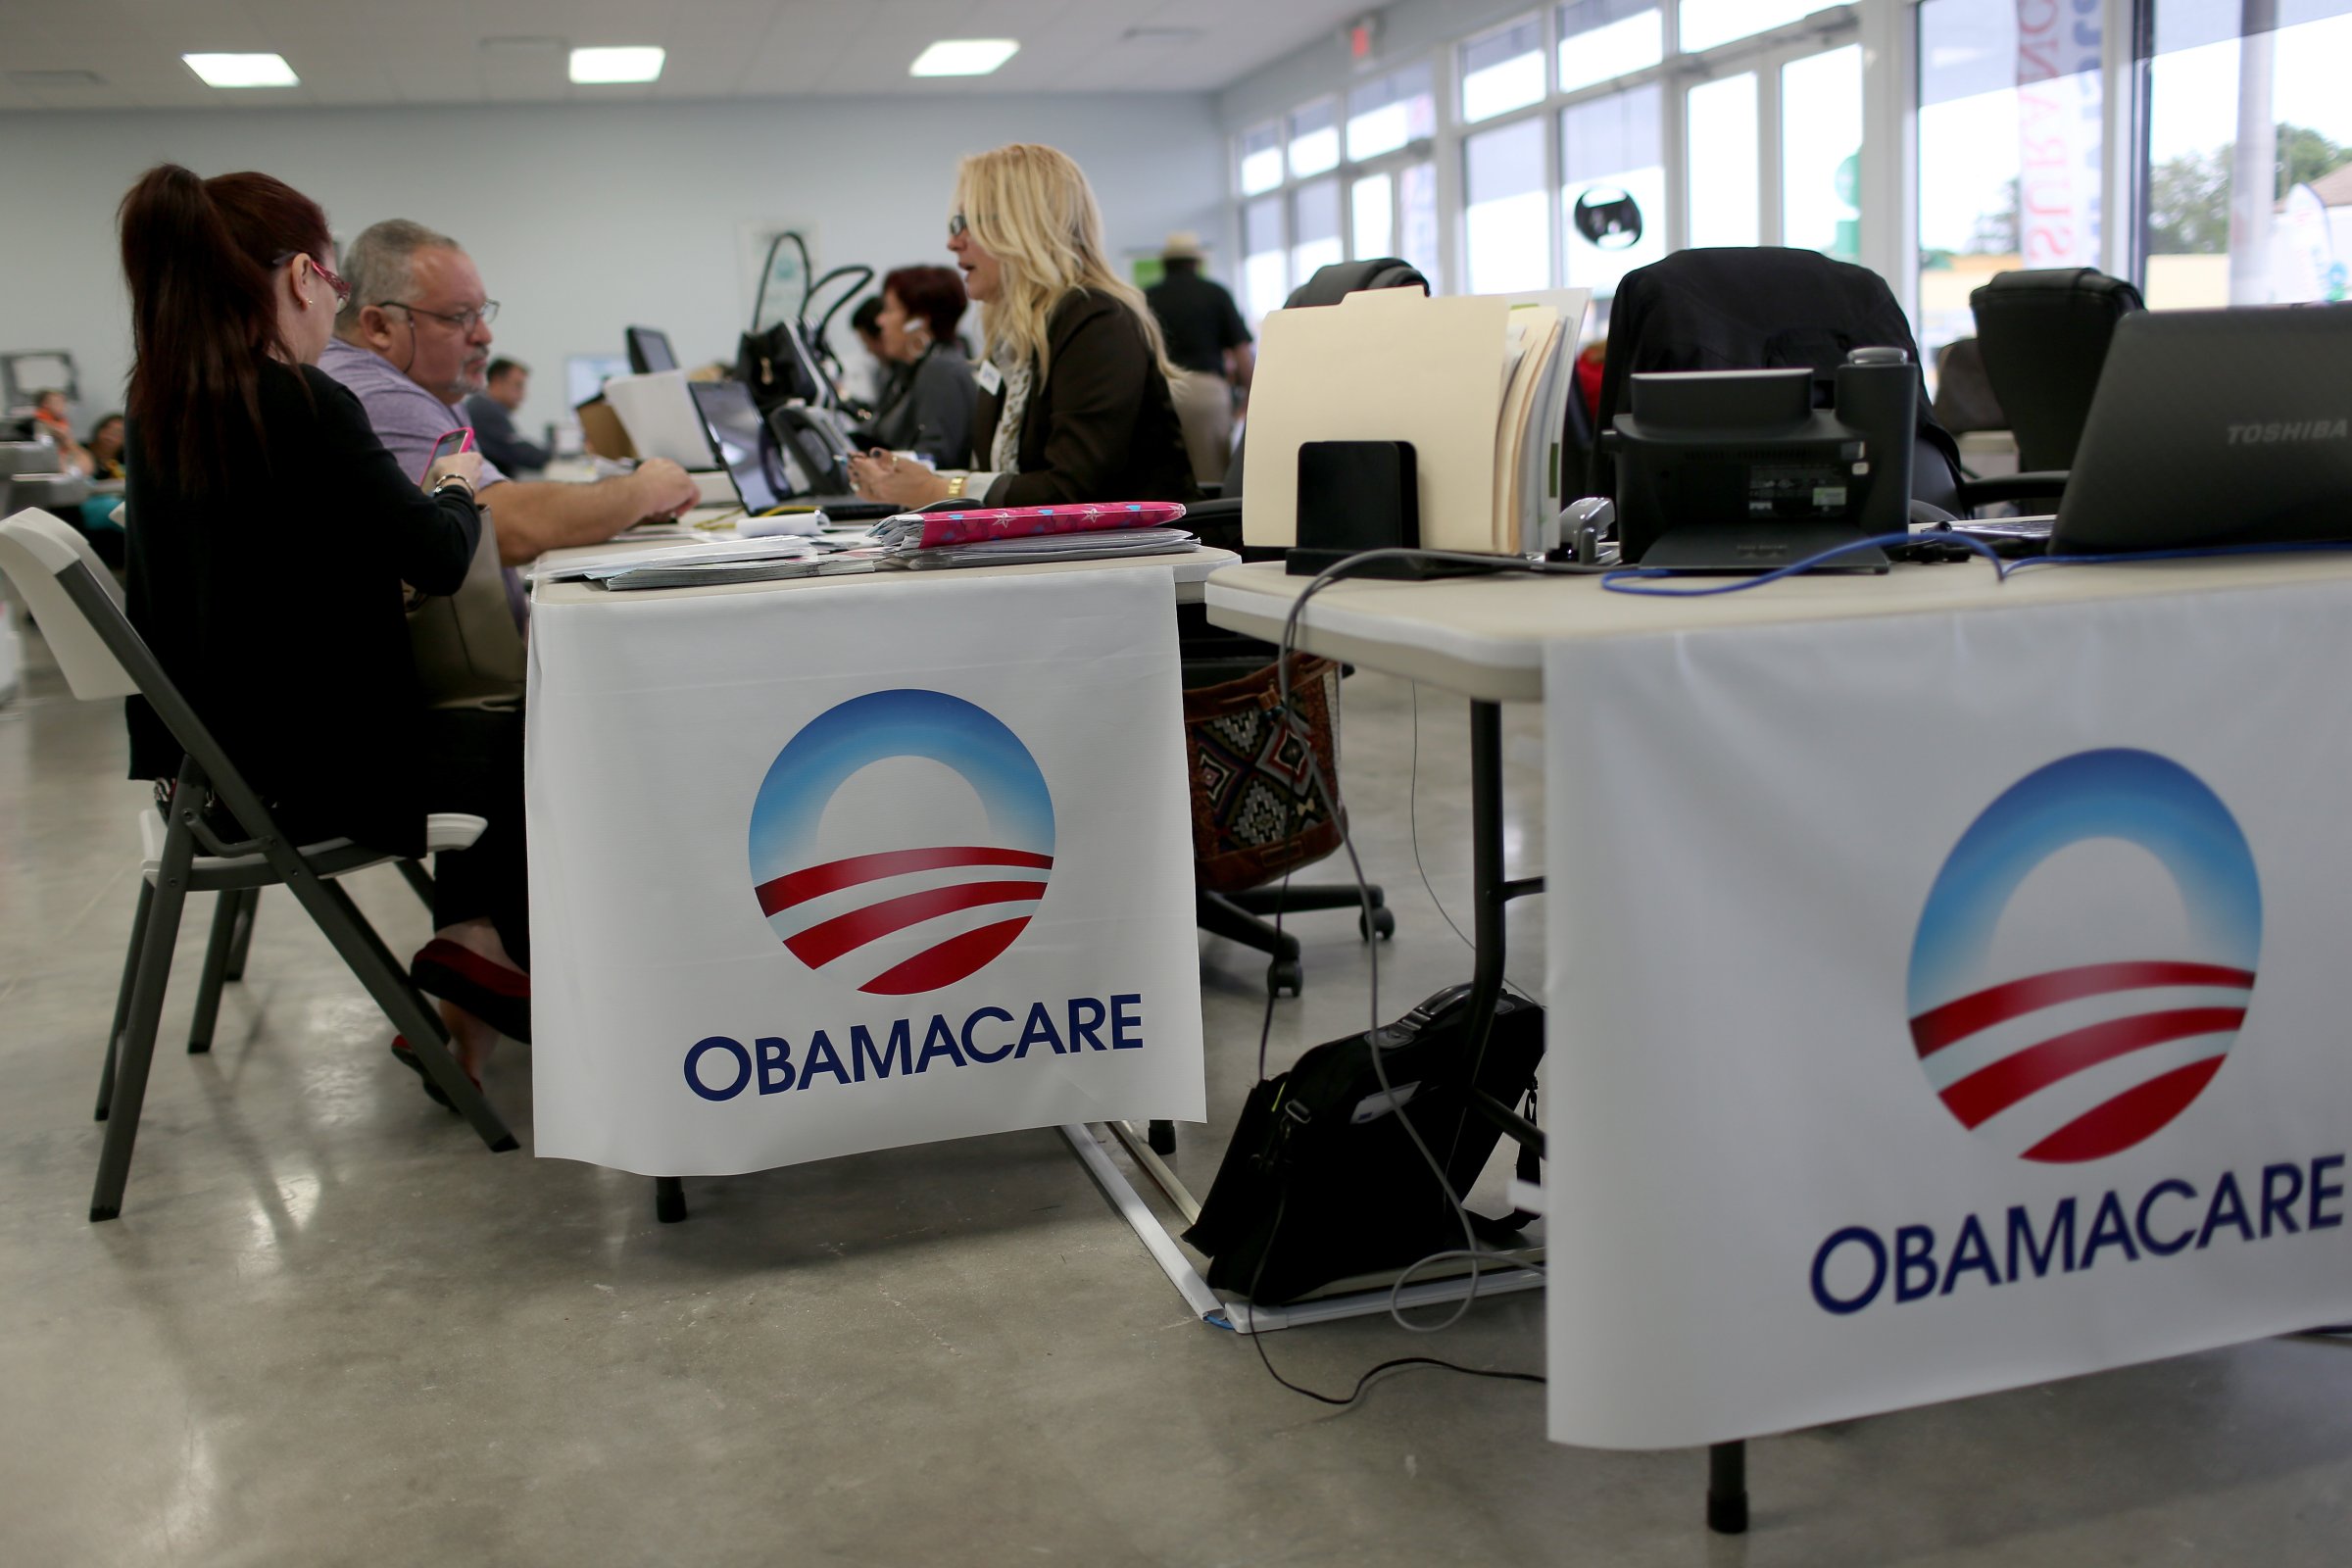 Aymara Marchante (L) and Wiktor Garcia sit with Maria Elena Santa Coloma, an insurance advisor with UniVista Insurance company, as they sign up for the Affordable Care Act, also known as Obamacare, before the February 15th deadline on February 5, 2015 in Miami, Florida.